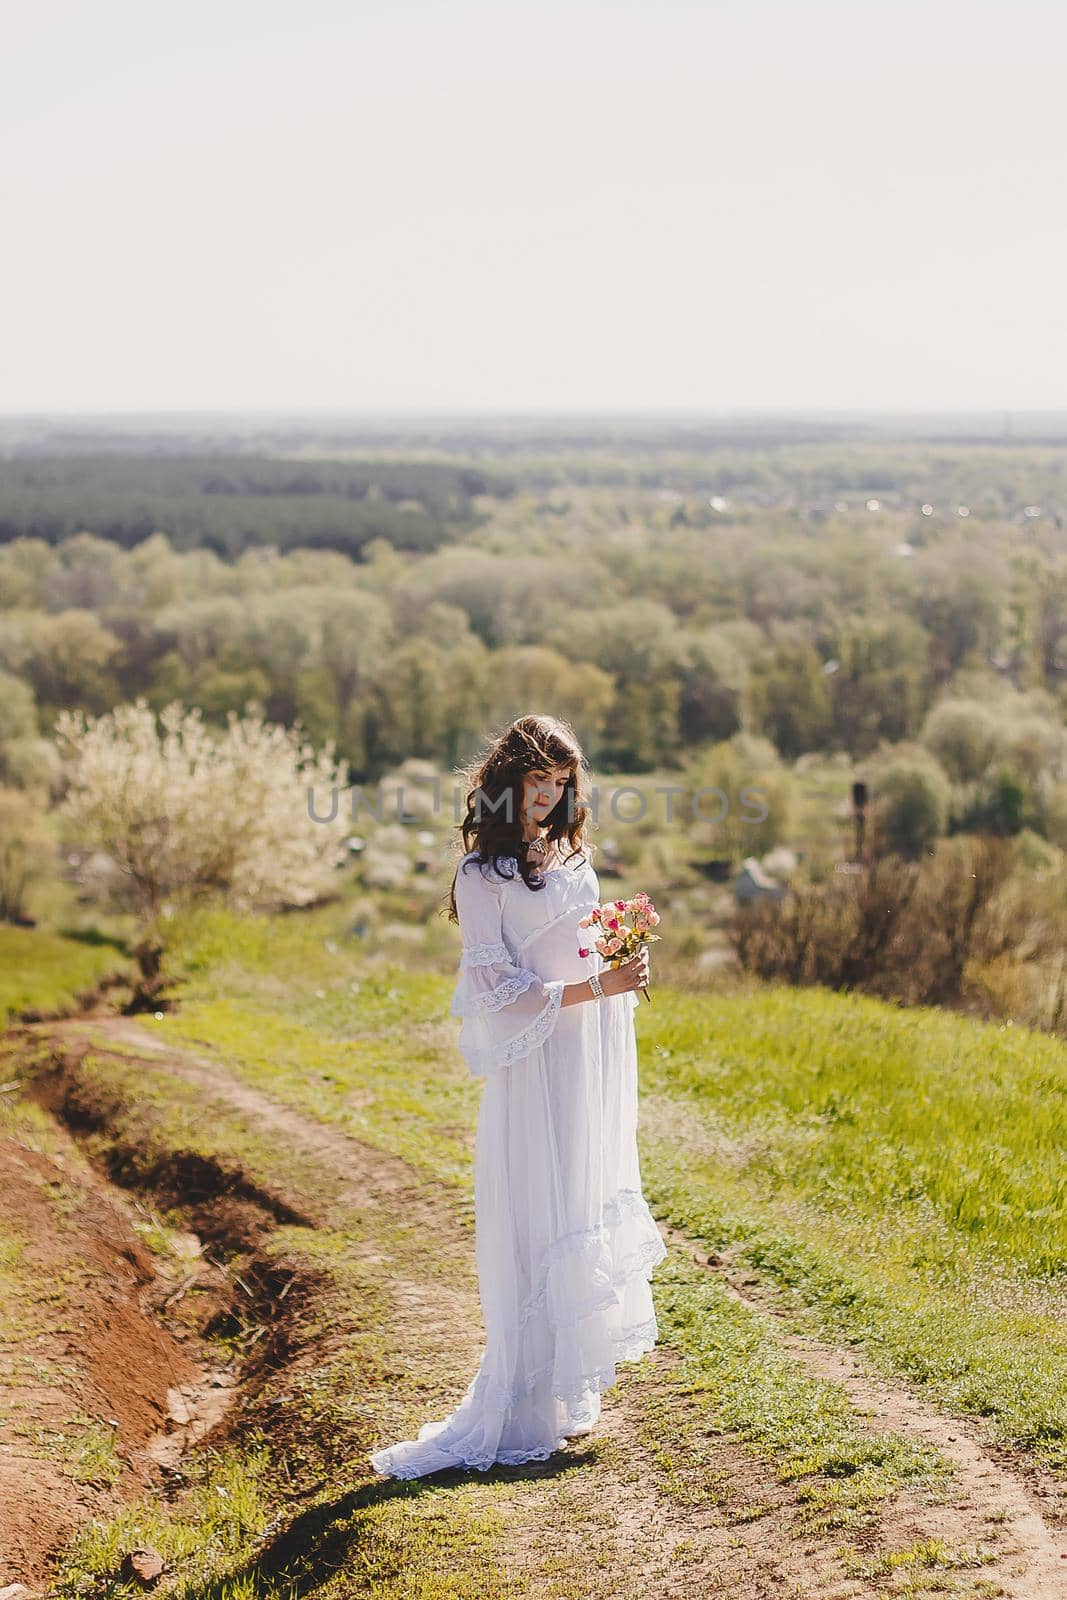 Portrait of carefree young woman in white vintage wedding style dress in spring cherry blossom garden valley.